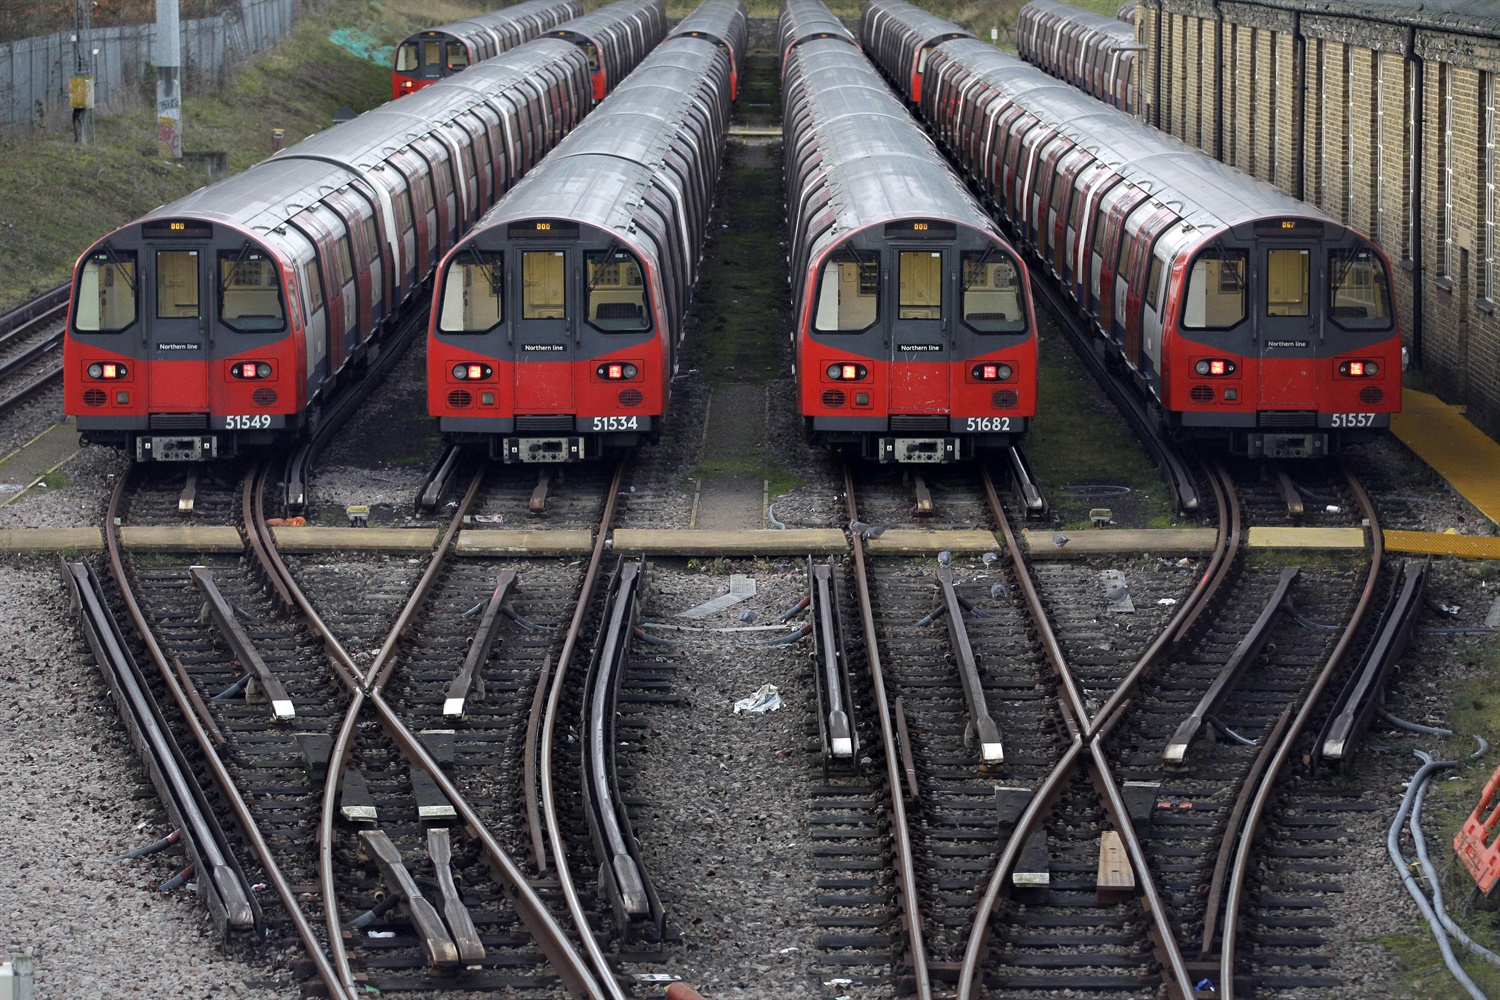 Tube driver strikes confirmed on Piccadilly and Hammersmith & City lines